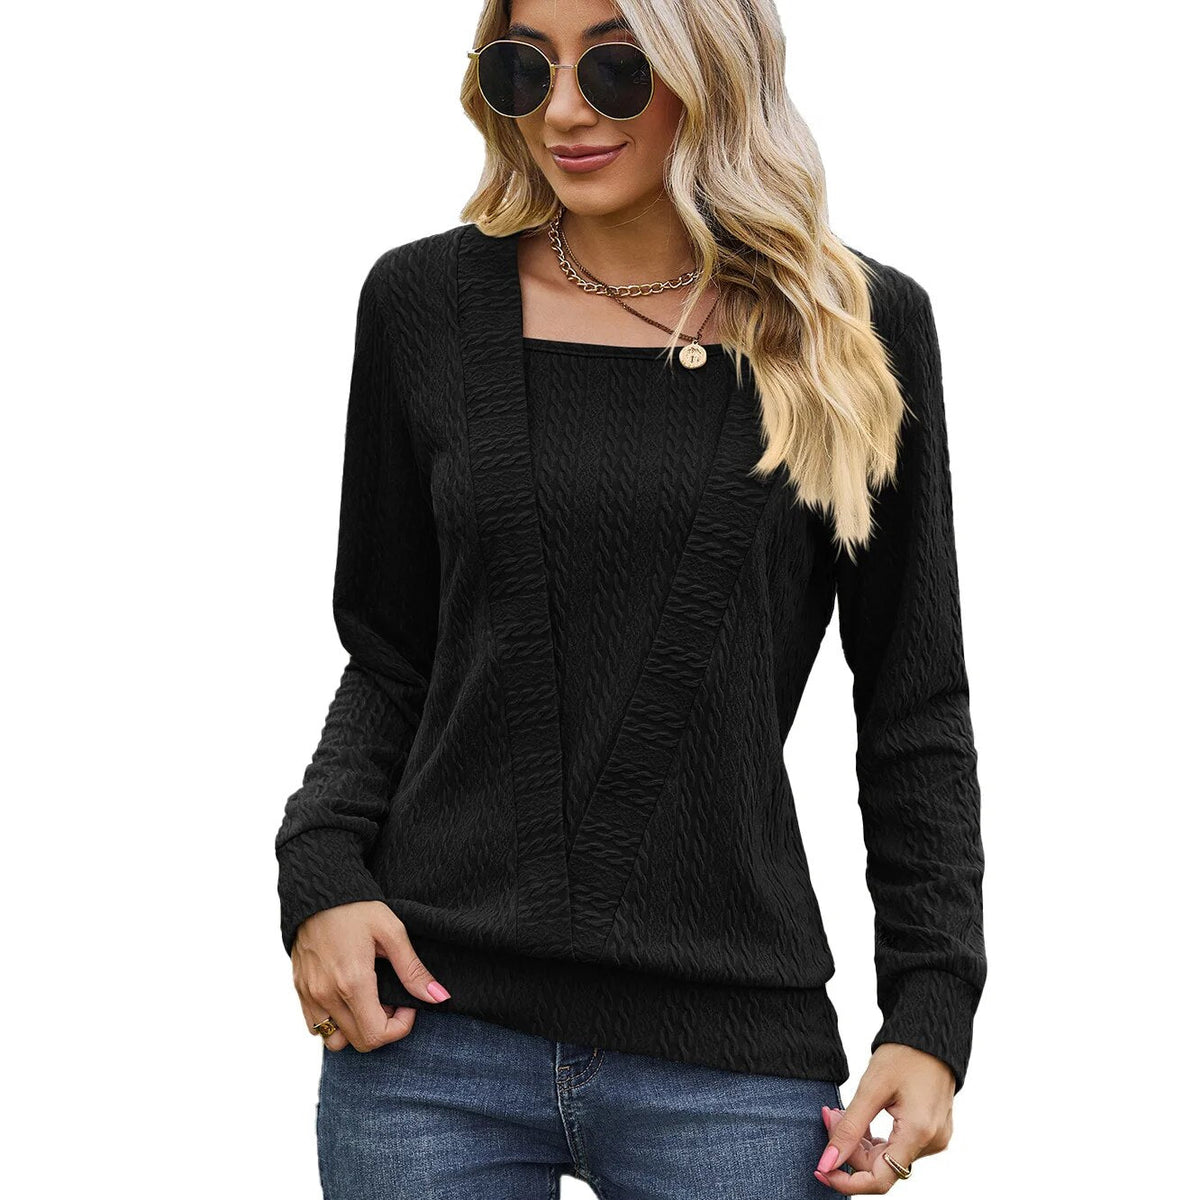 xakxx- Square Neck Long Sleeved Pullover Women Casual Solid Color Loose T Shirt Lady Simple Autumn Winter Tops